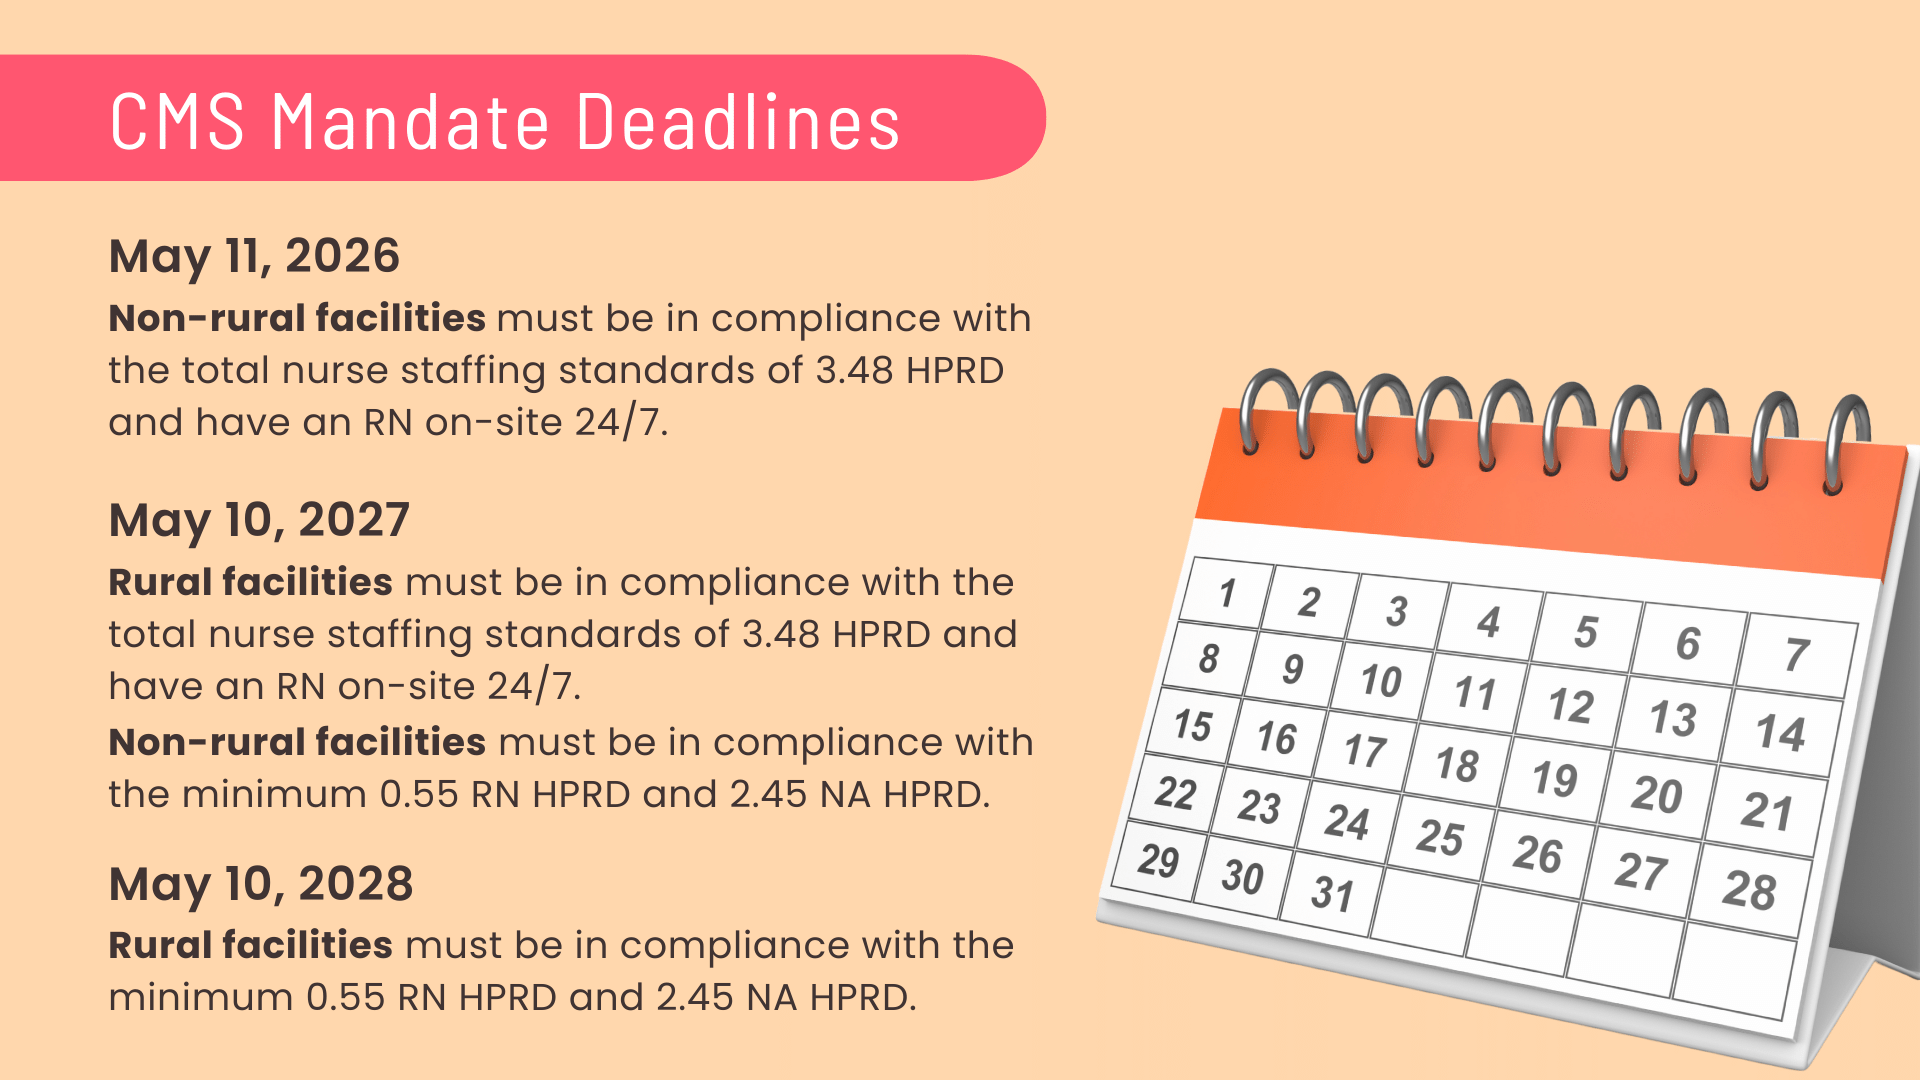 A photo that shows a calendar and lists the dates non-rural and rural nursing homes must comply with the new CMS staffing requirements. 